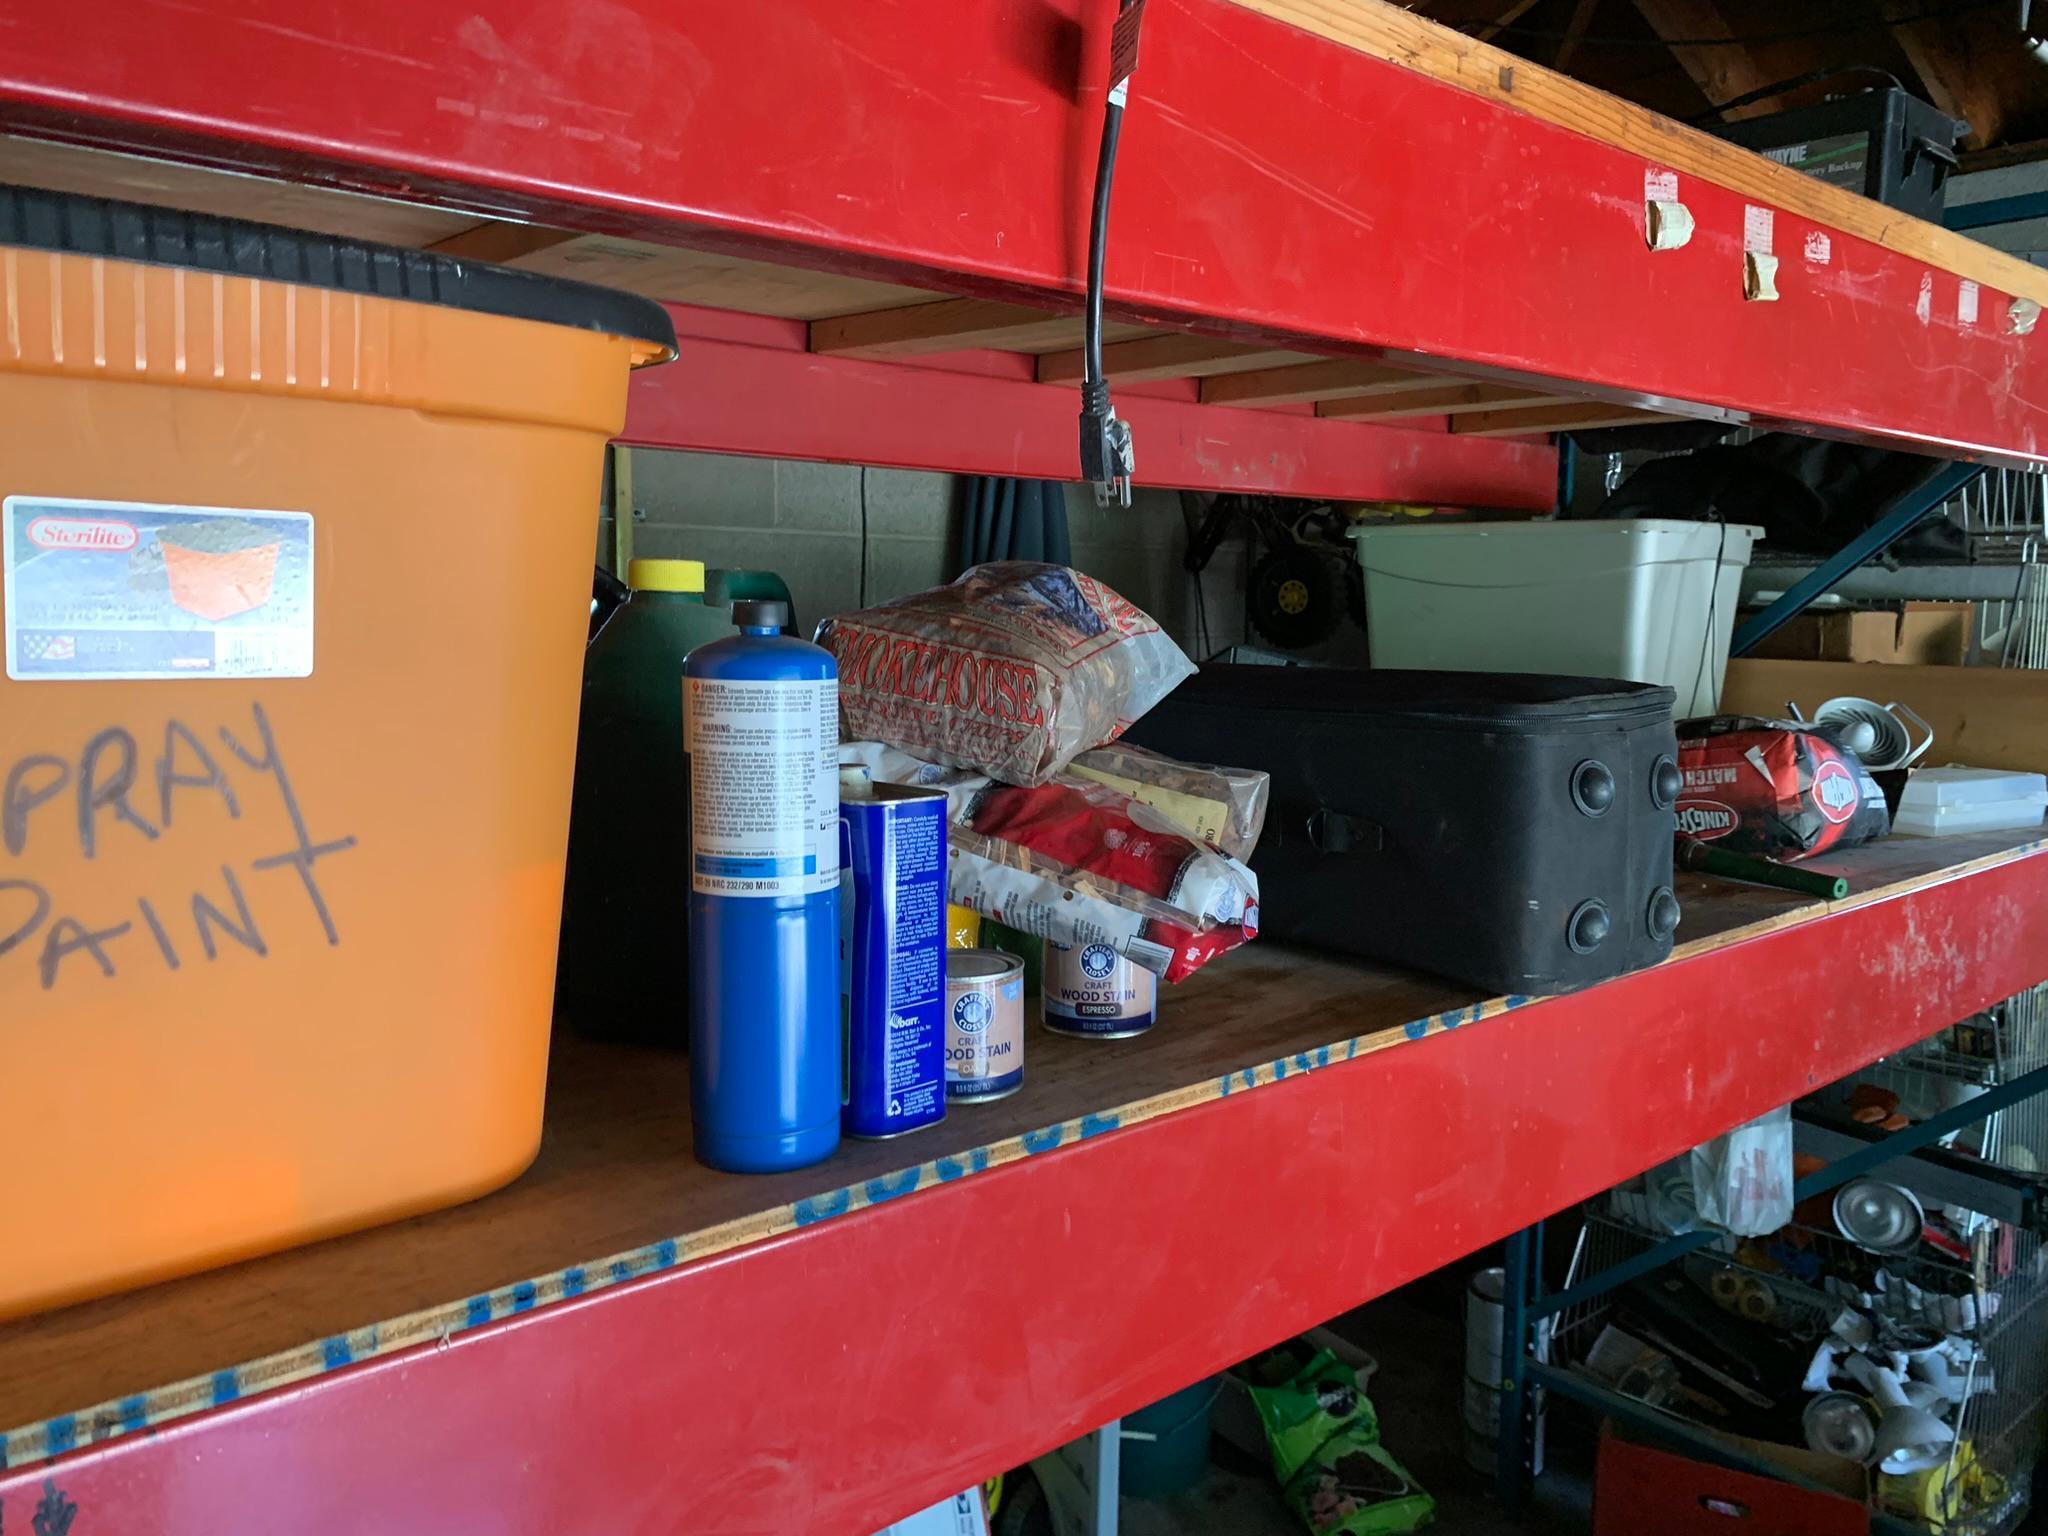 Garage and Outdoor Area Contents - Tools, Shelving, Hardware, Fryers,